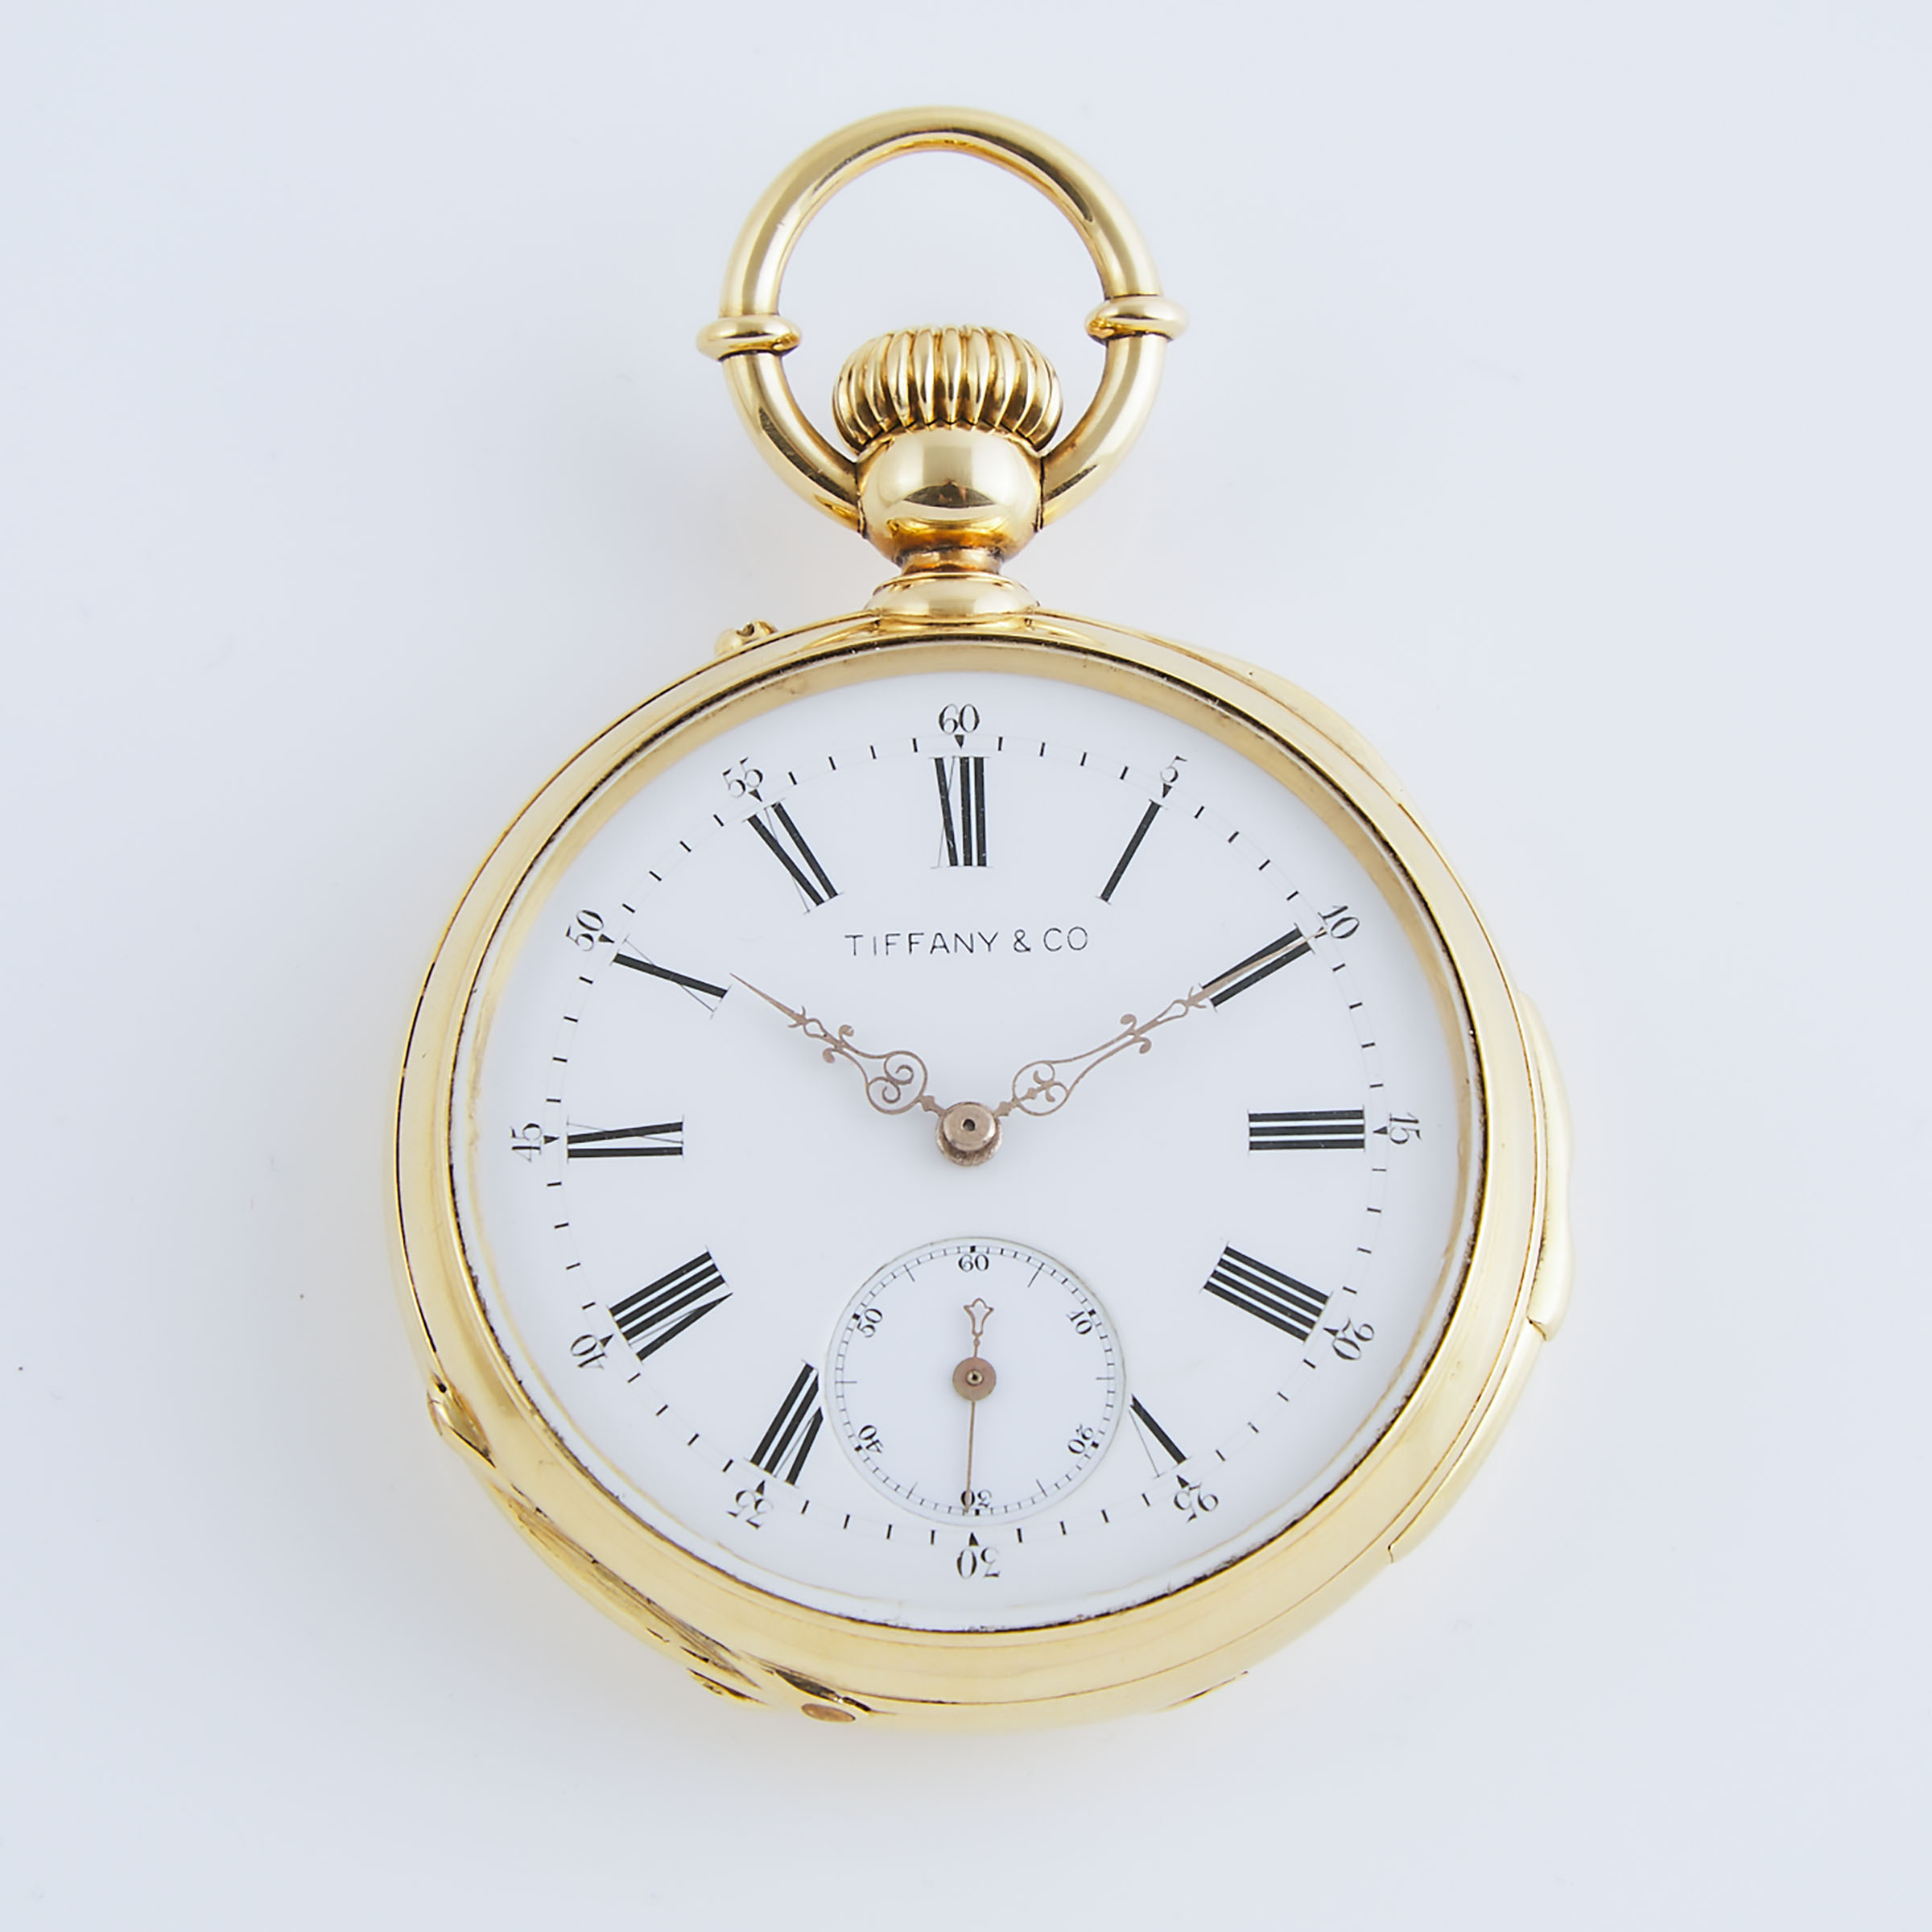 J.A.Jaccard & Co. Openface Stem Wind Pocket Watch With Quarter Repeat